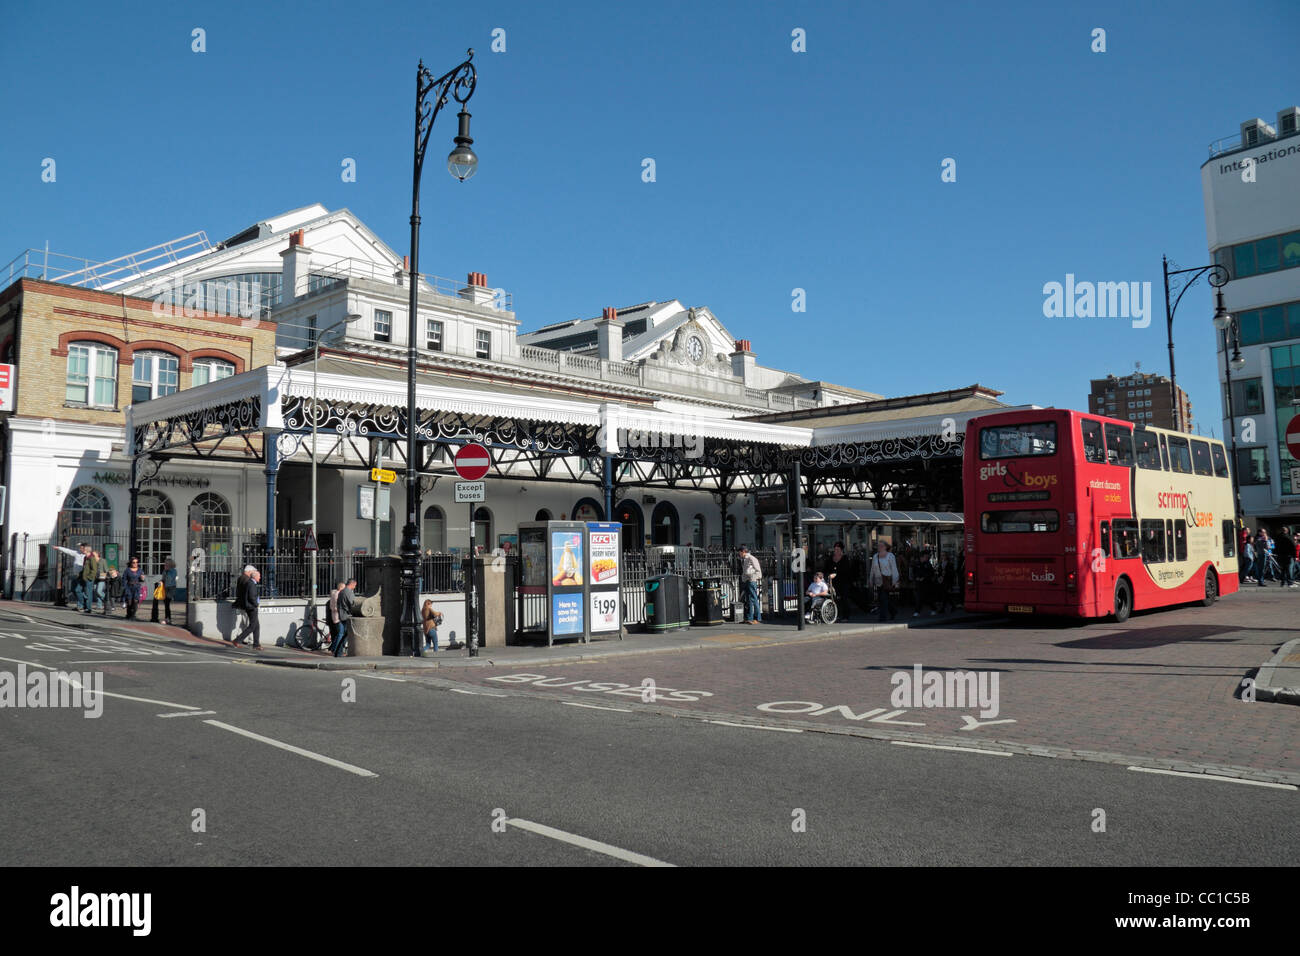 The bus stand in front of Brighton mainline railway station in Brighton, East Sussex, UK. Stock Photo